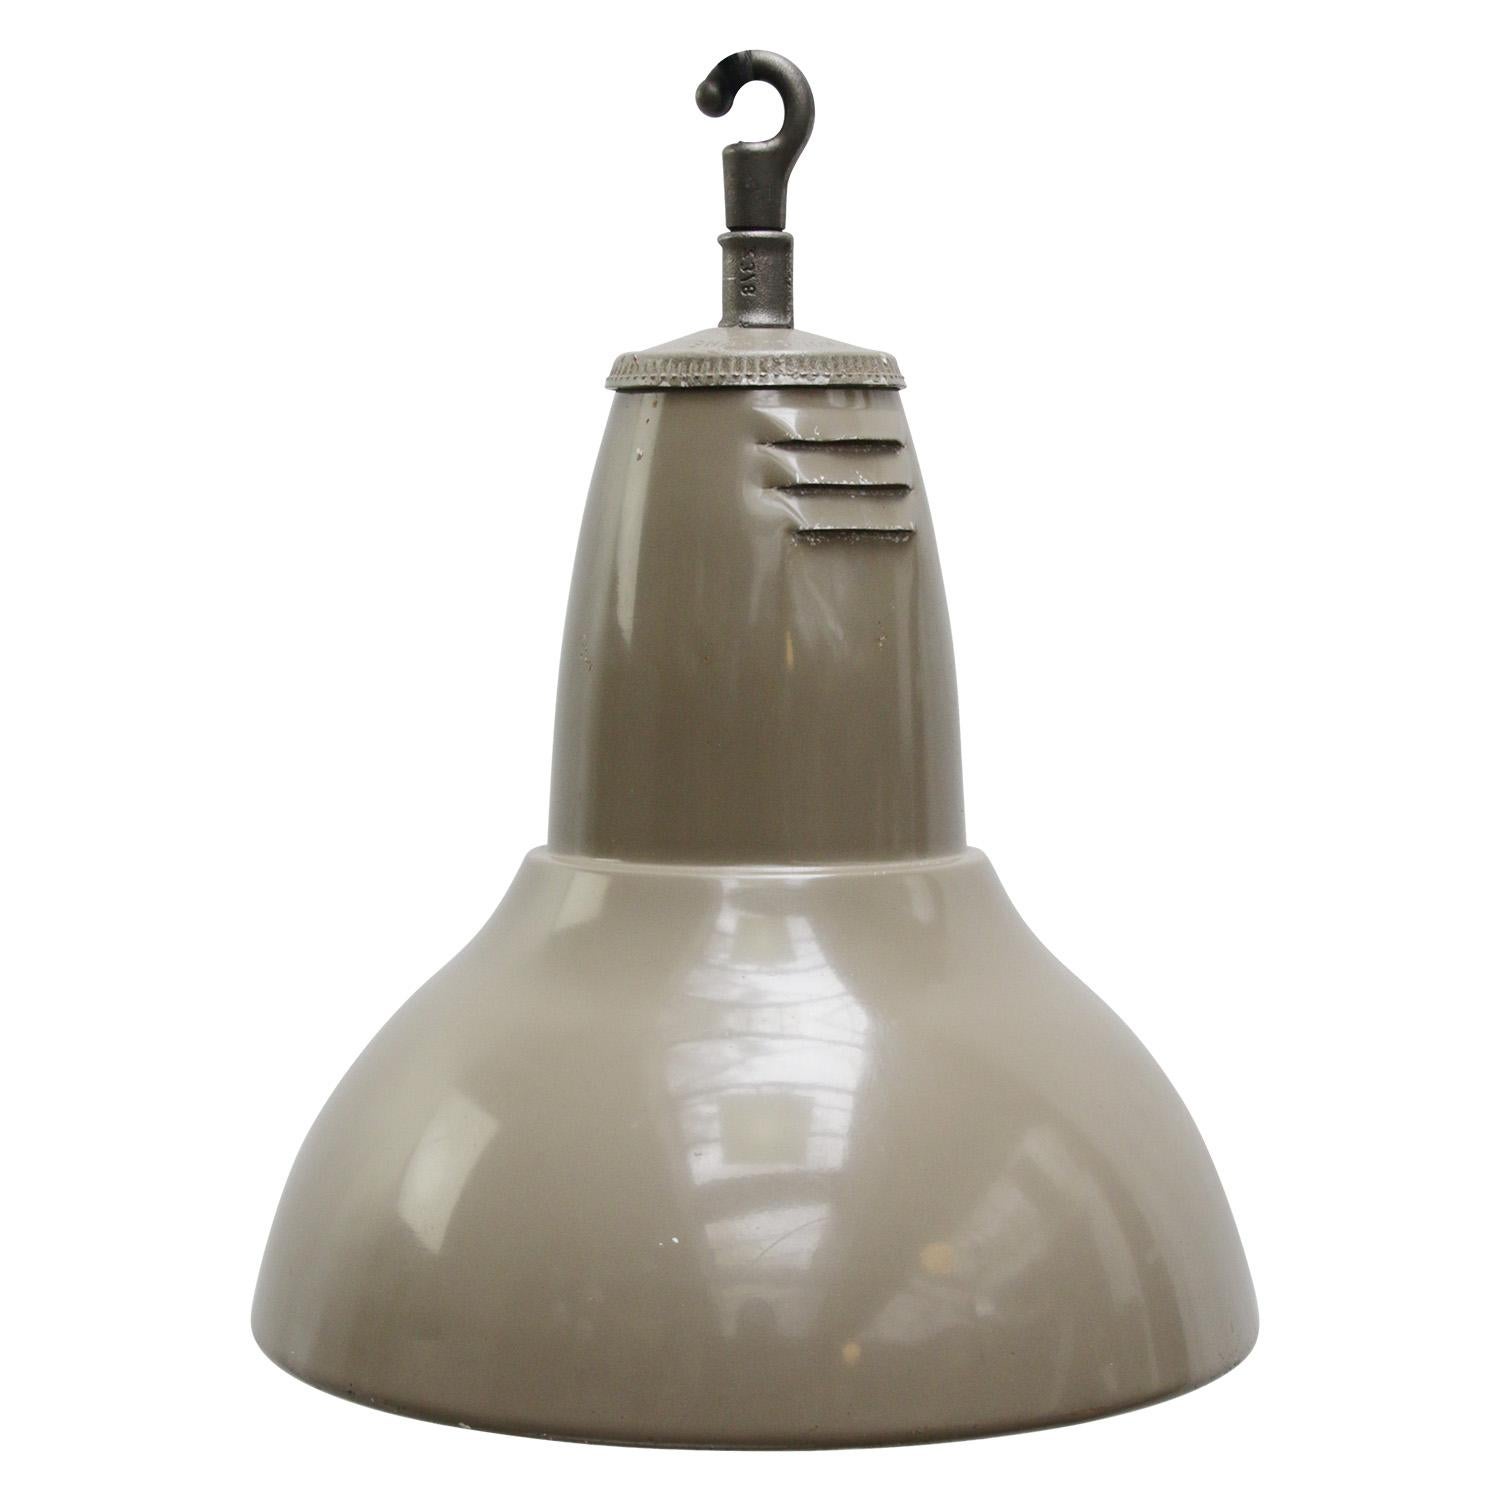 Industrial pendant lamp by Holophane Paris
Beige metal shade with clear striped / holophane glass
Metal top

Weight 3.75 kg / 8.3 lb

Priced per individual item. All lamps have been made suitable by international standards for incandescent